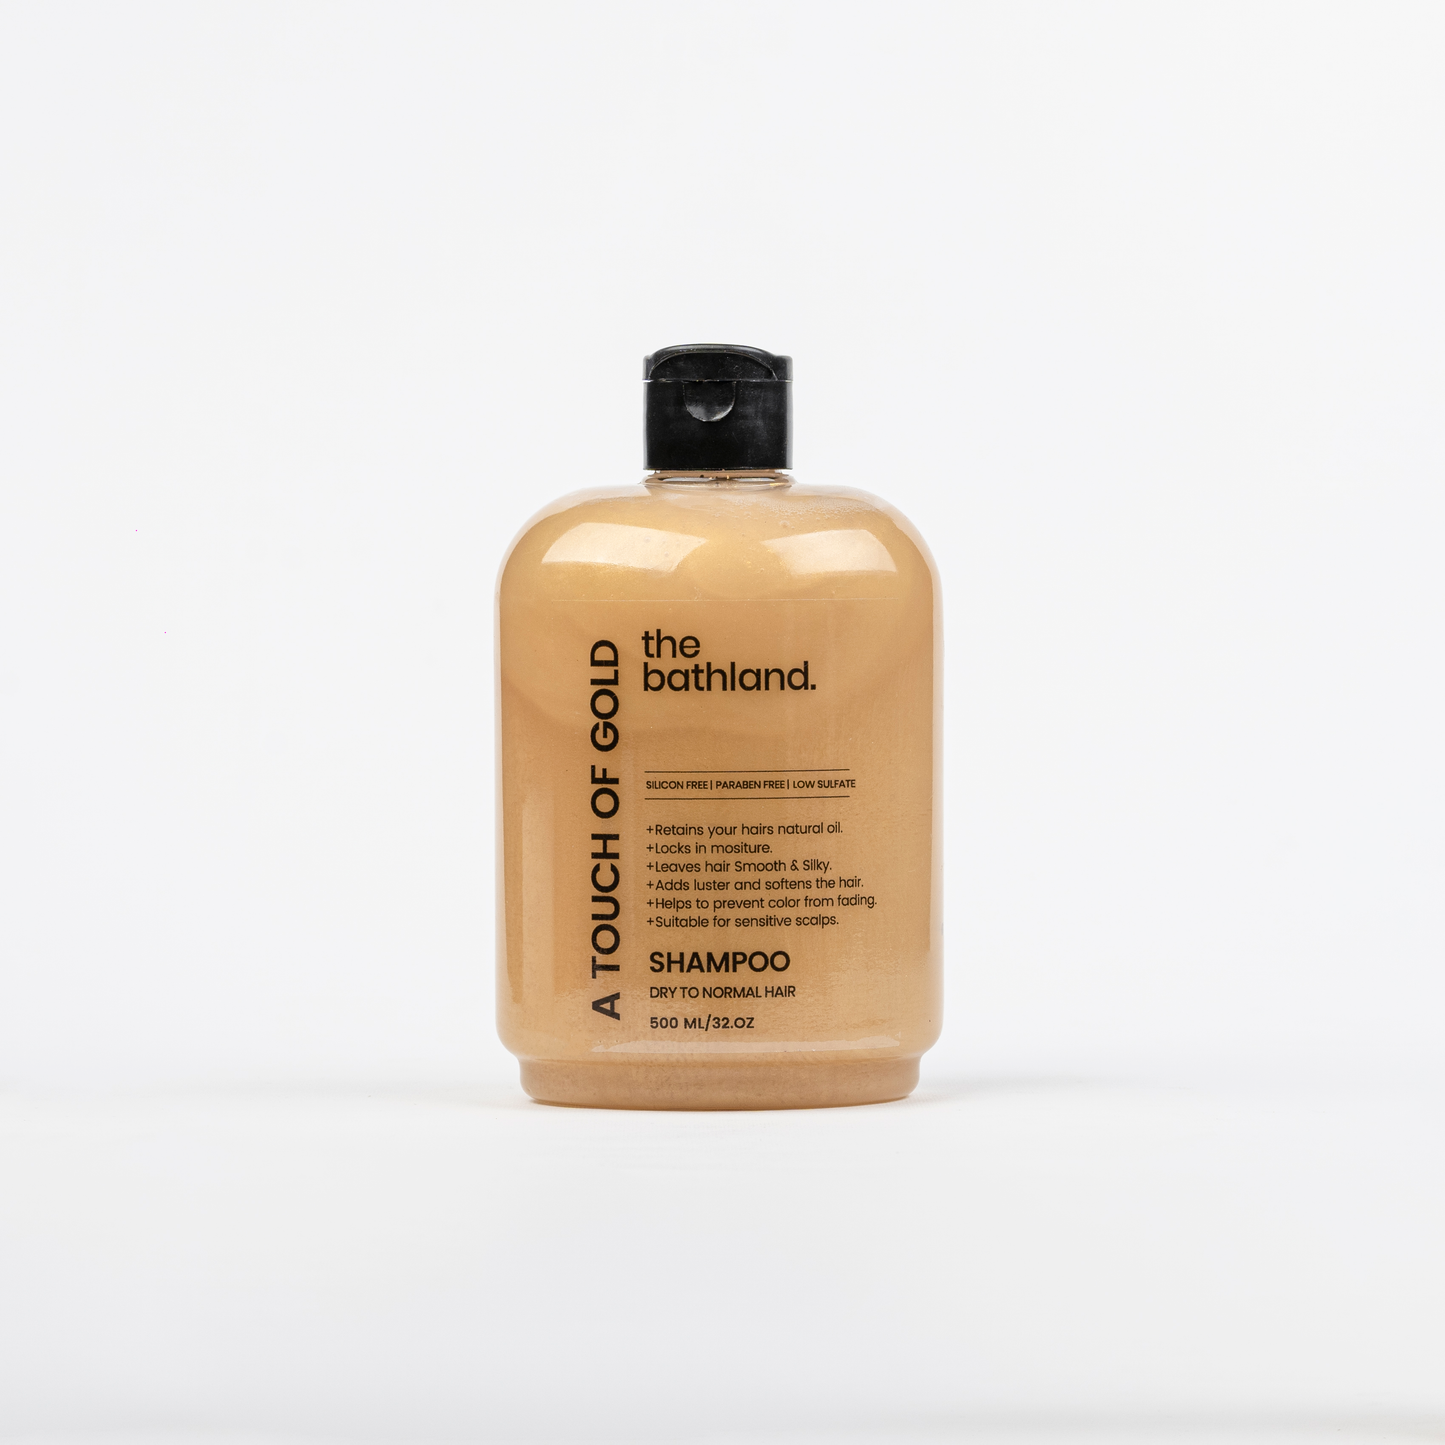 A touch of gold low Sulfate shampoo